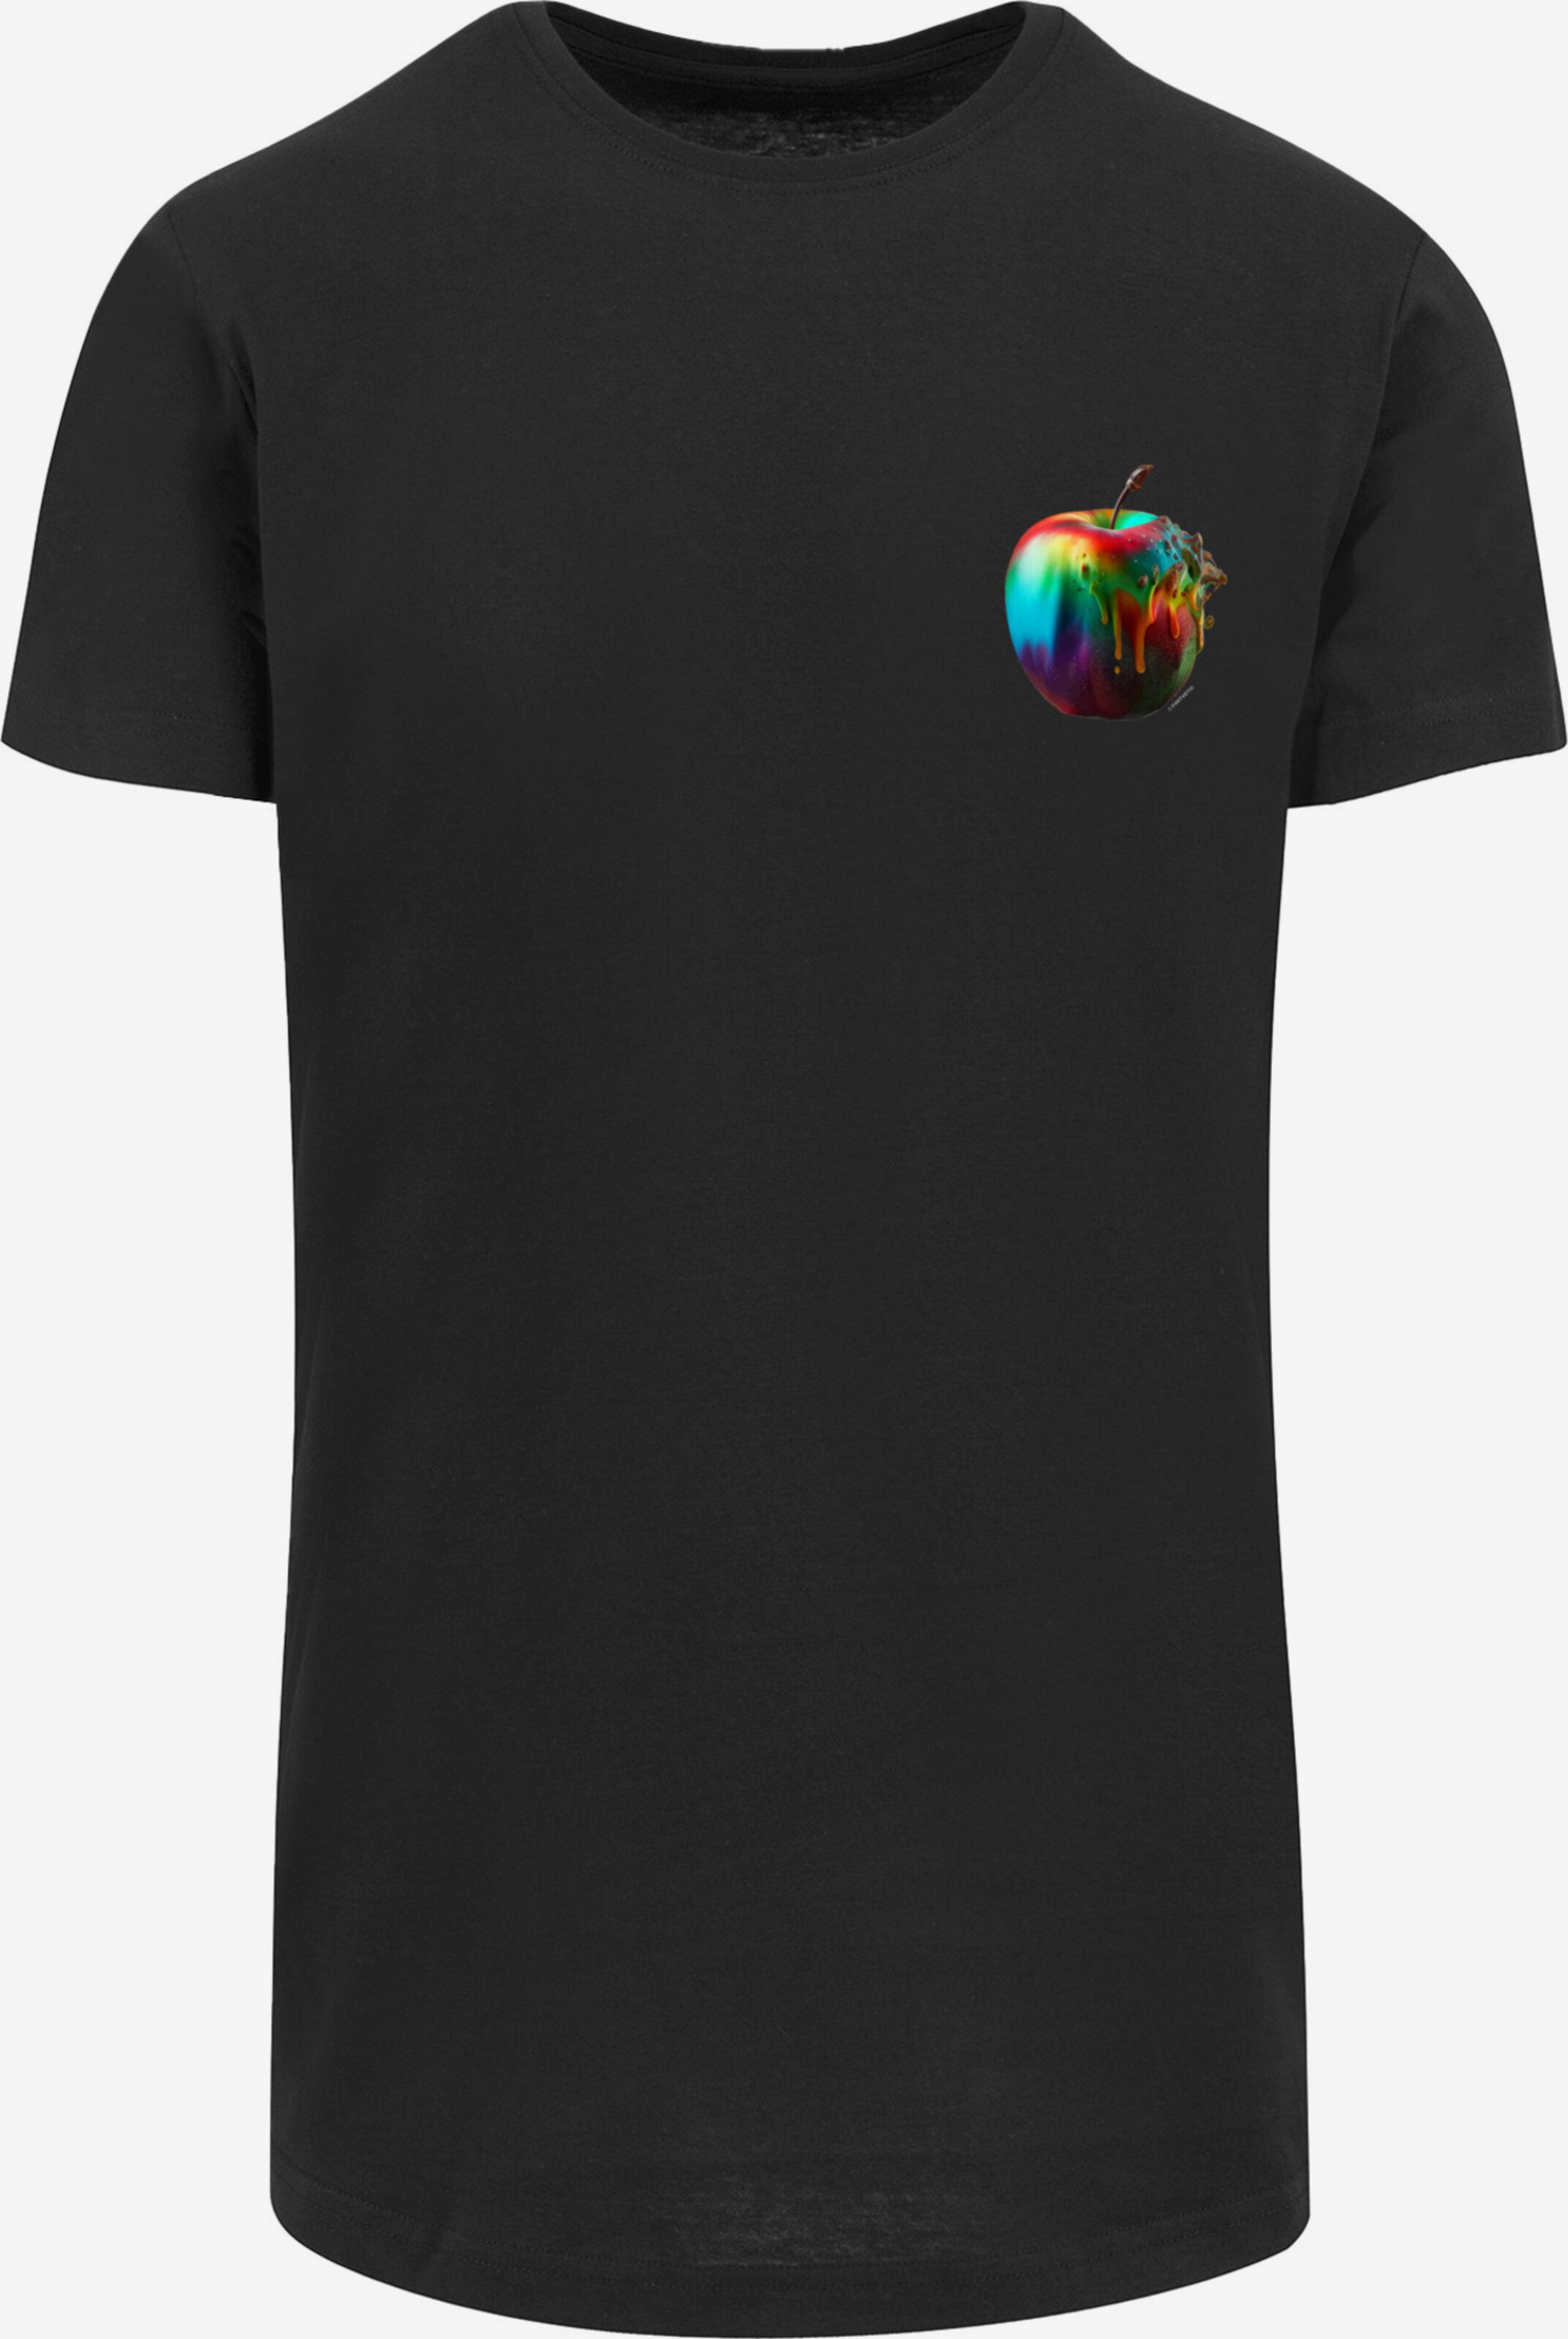 ABOUT YOU in | F4NT4STIC Black Shirt Rainbow Apple\' \'Colorfood - Collection